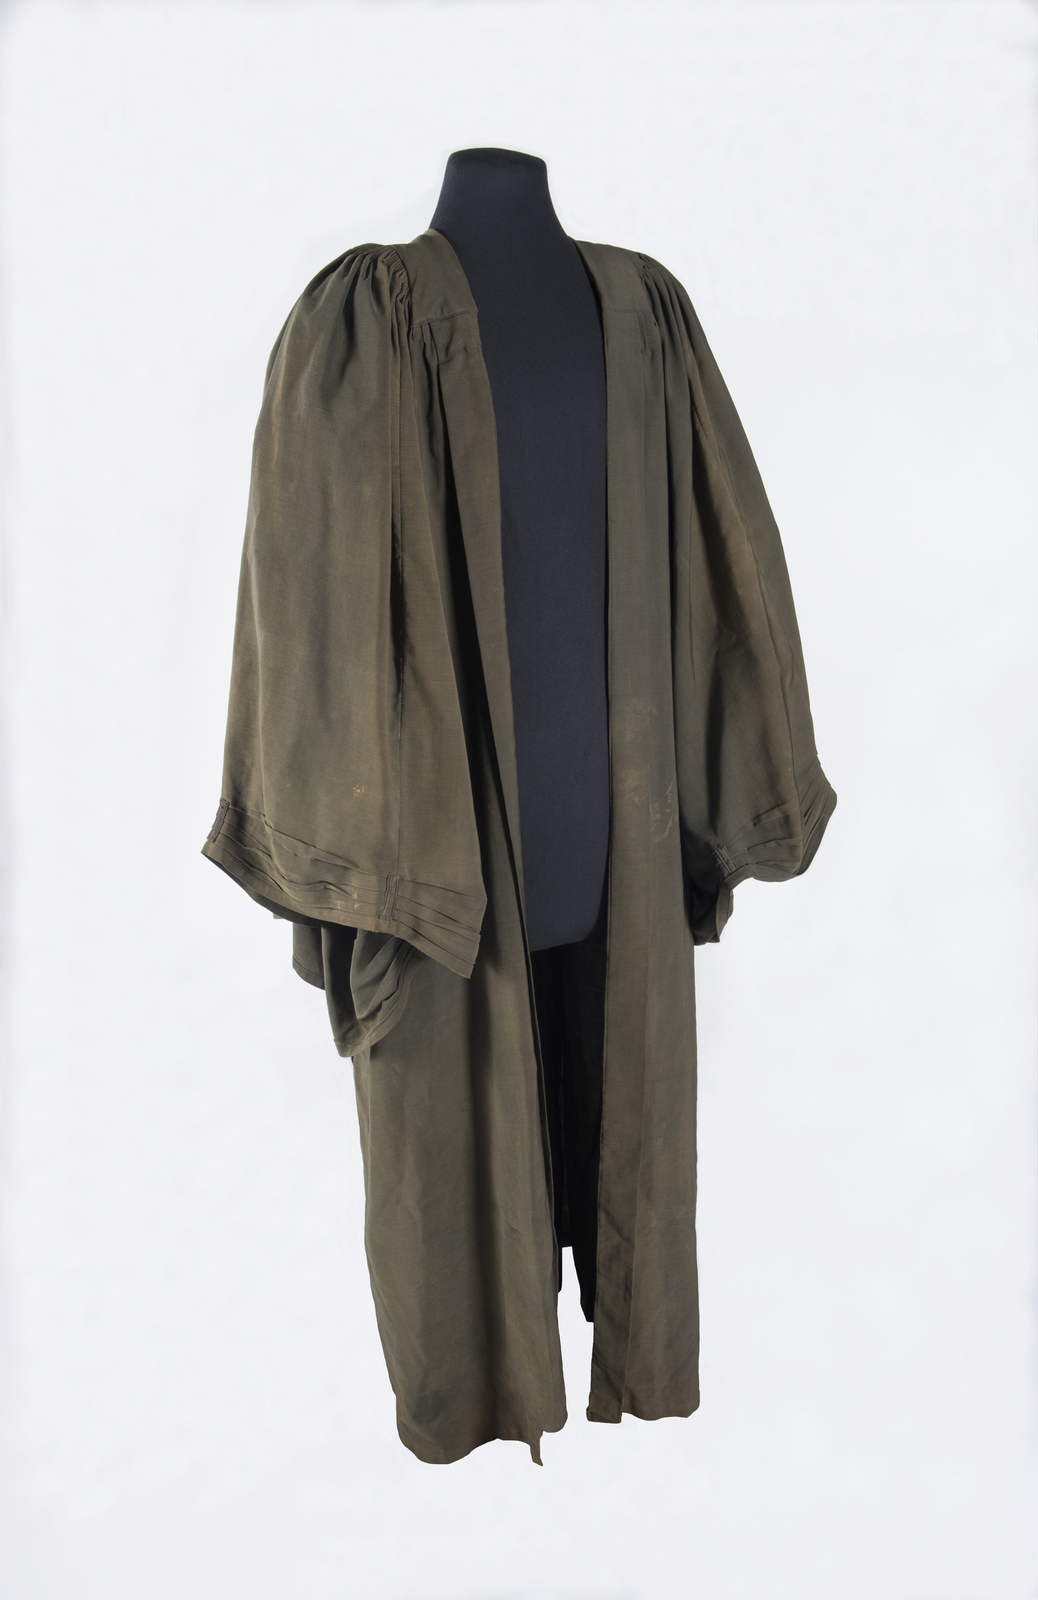 After over 3 years of investigation, all the pieces of evidence make a sound case for the robe having been wore by magistrate Hugh Richardson who presided over the three most famous court cases in Canadian history. Canadian Museum of History, 2013.54.1